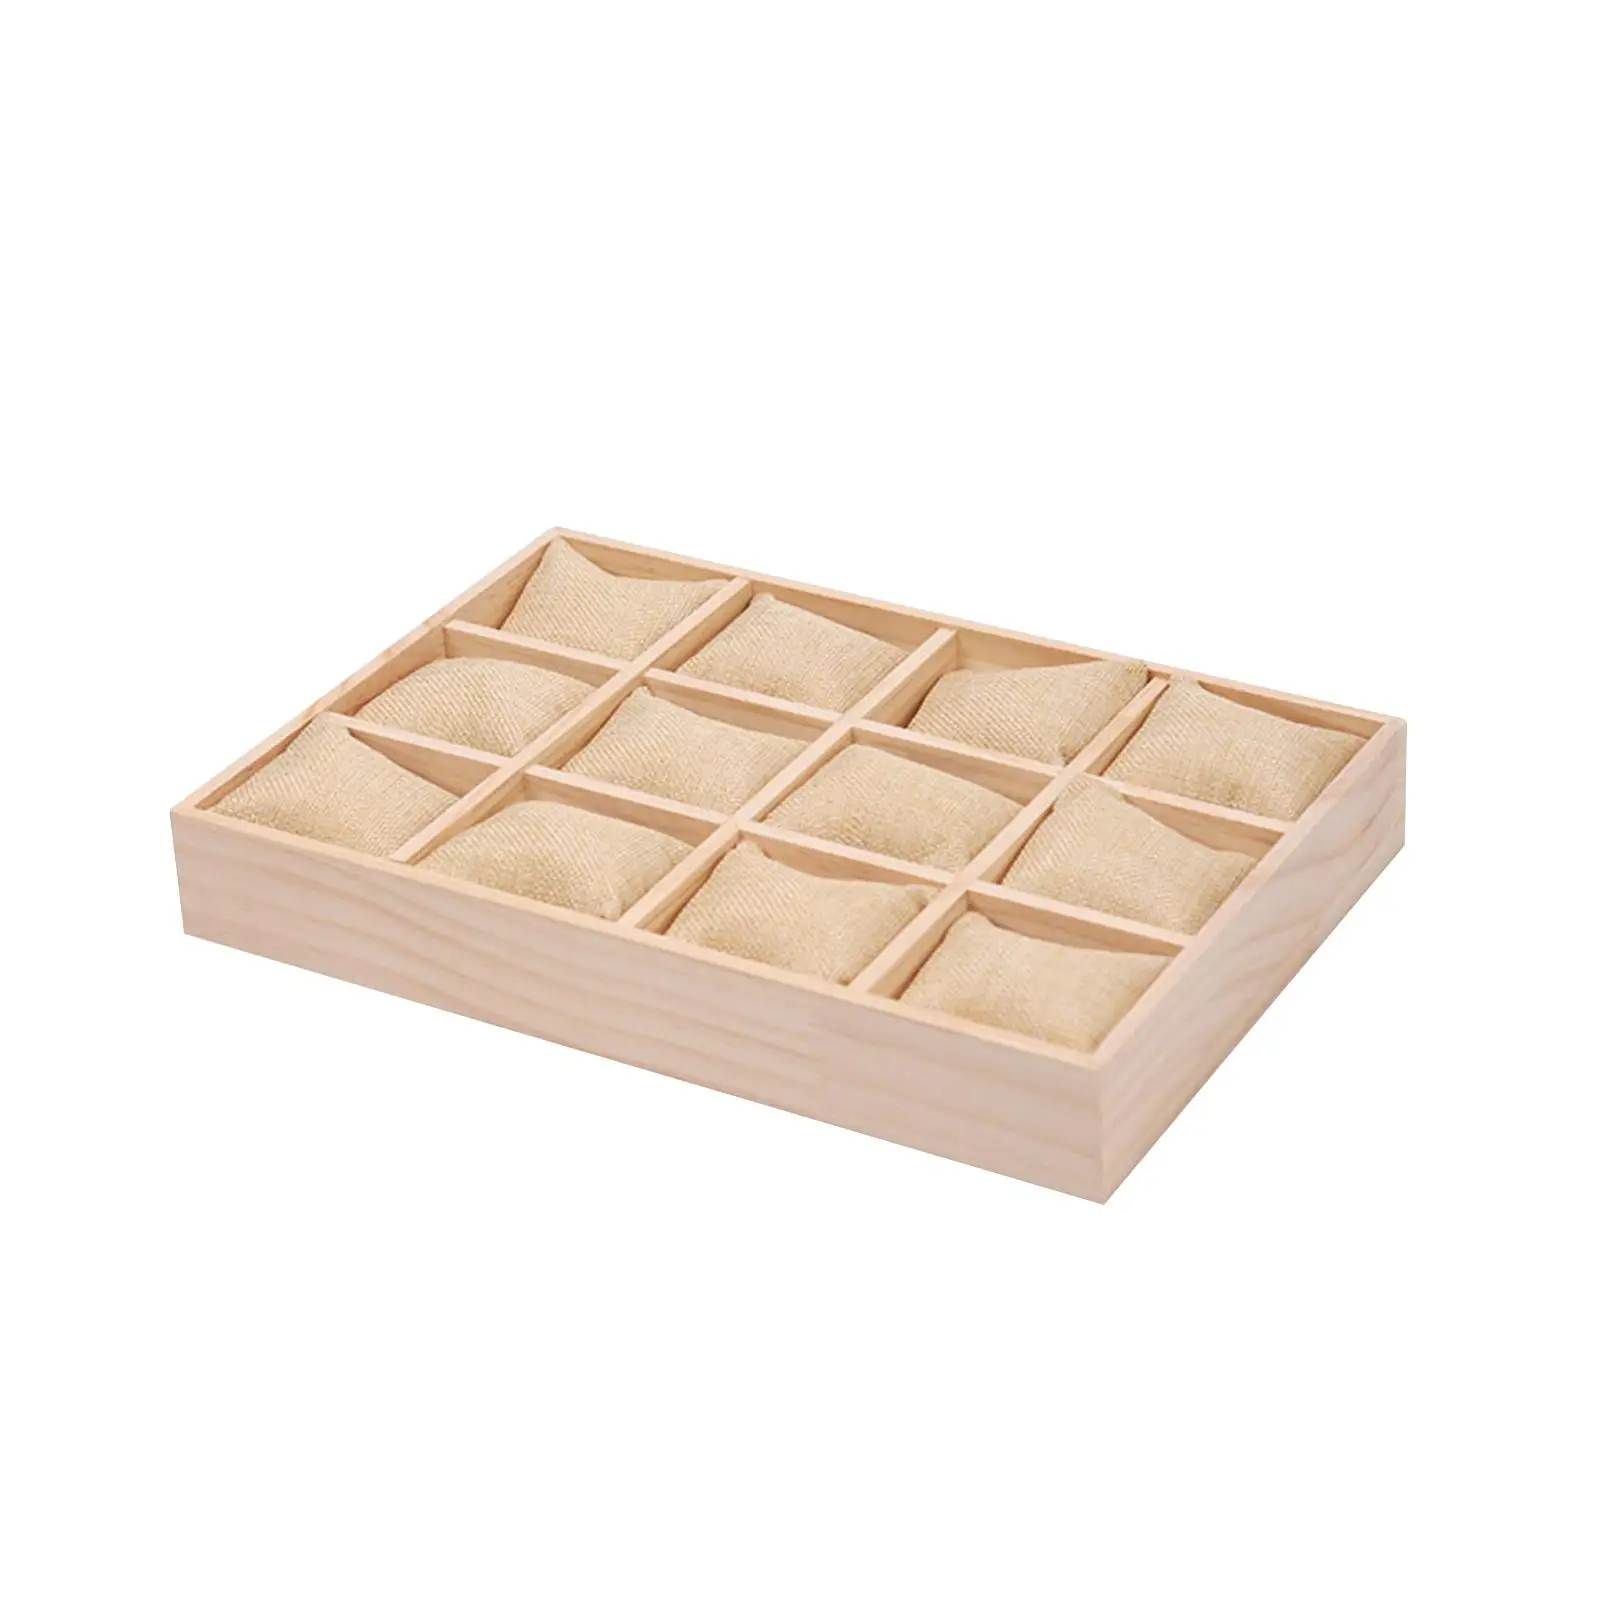 Watch Organizer Tray Wooden Jewelry Bracelet Storage Case 12 Grids Watch Pillows Tray for Dresser Counter Drawer Gifts Shop